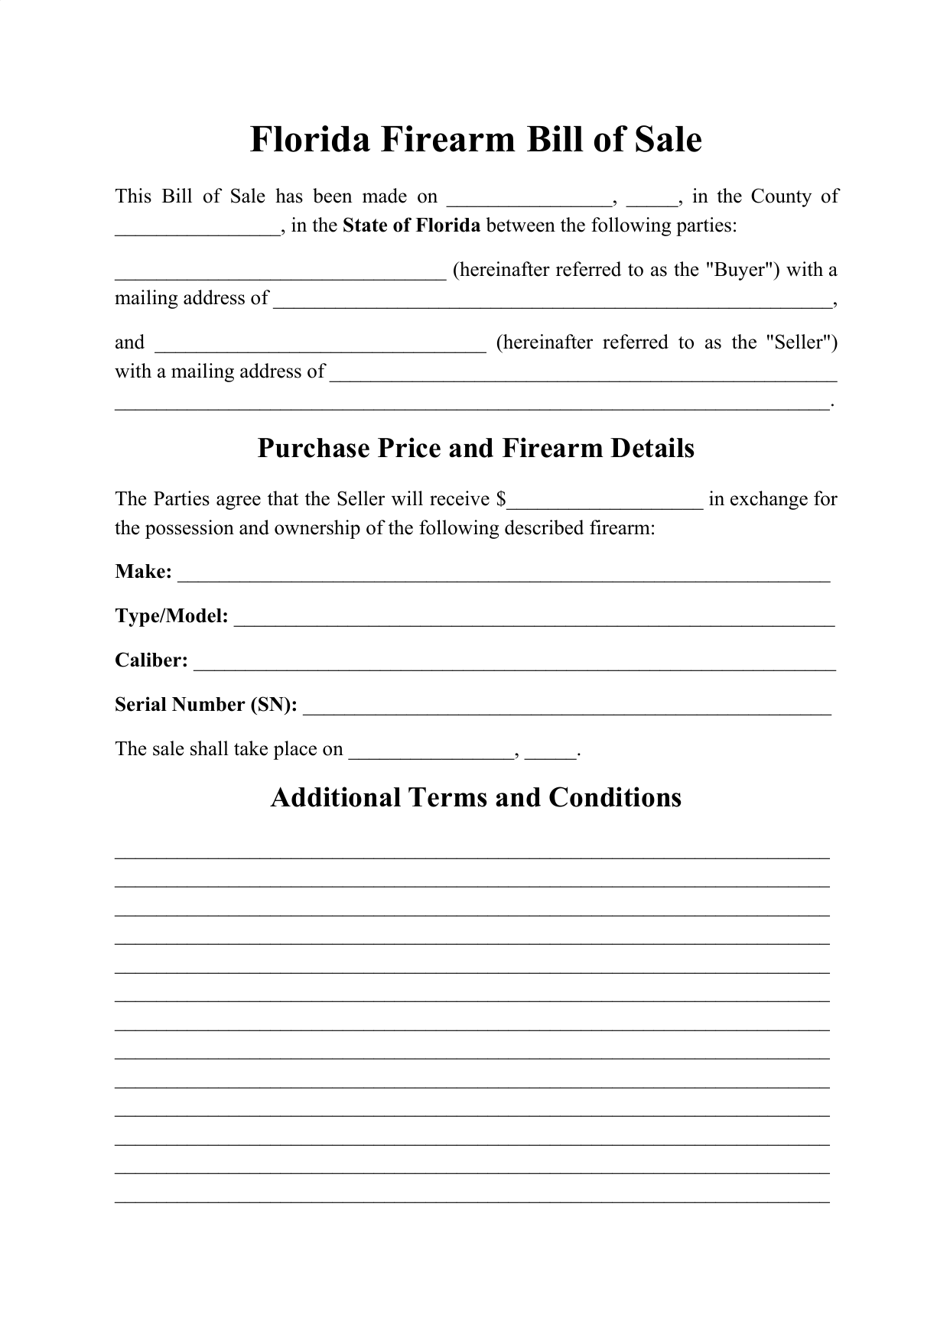 florida-firearm-bill-of-sale-form-fill-out-sign-online-and-download